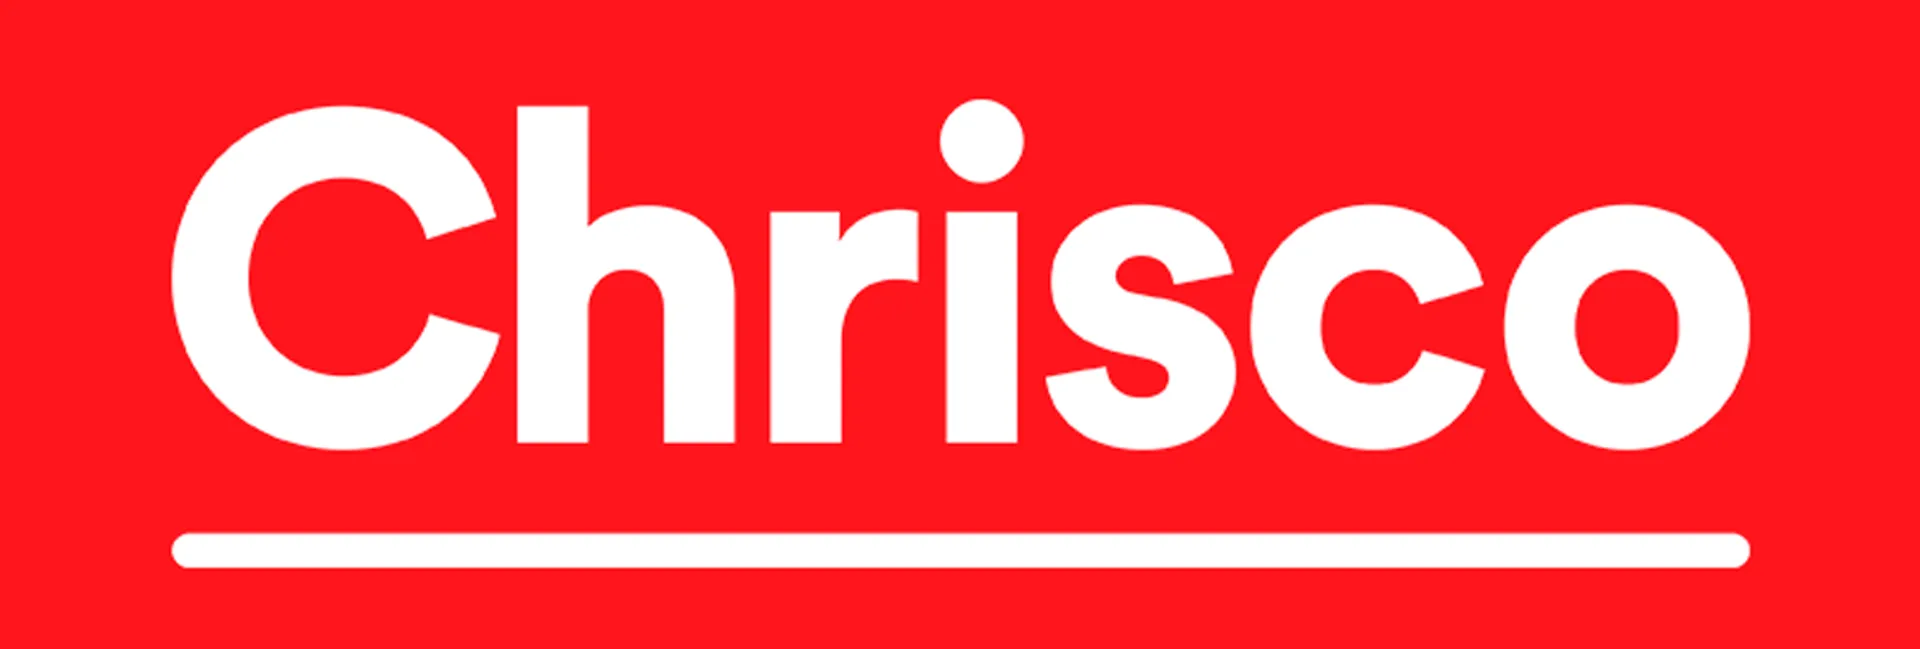 CHRISCO logo current weekly ad